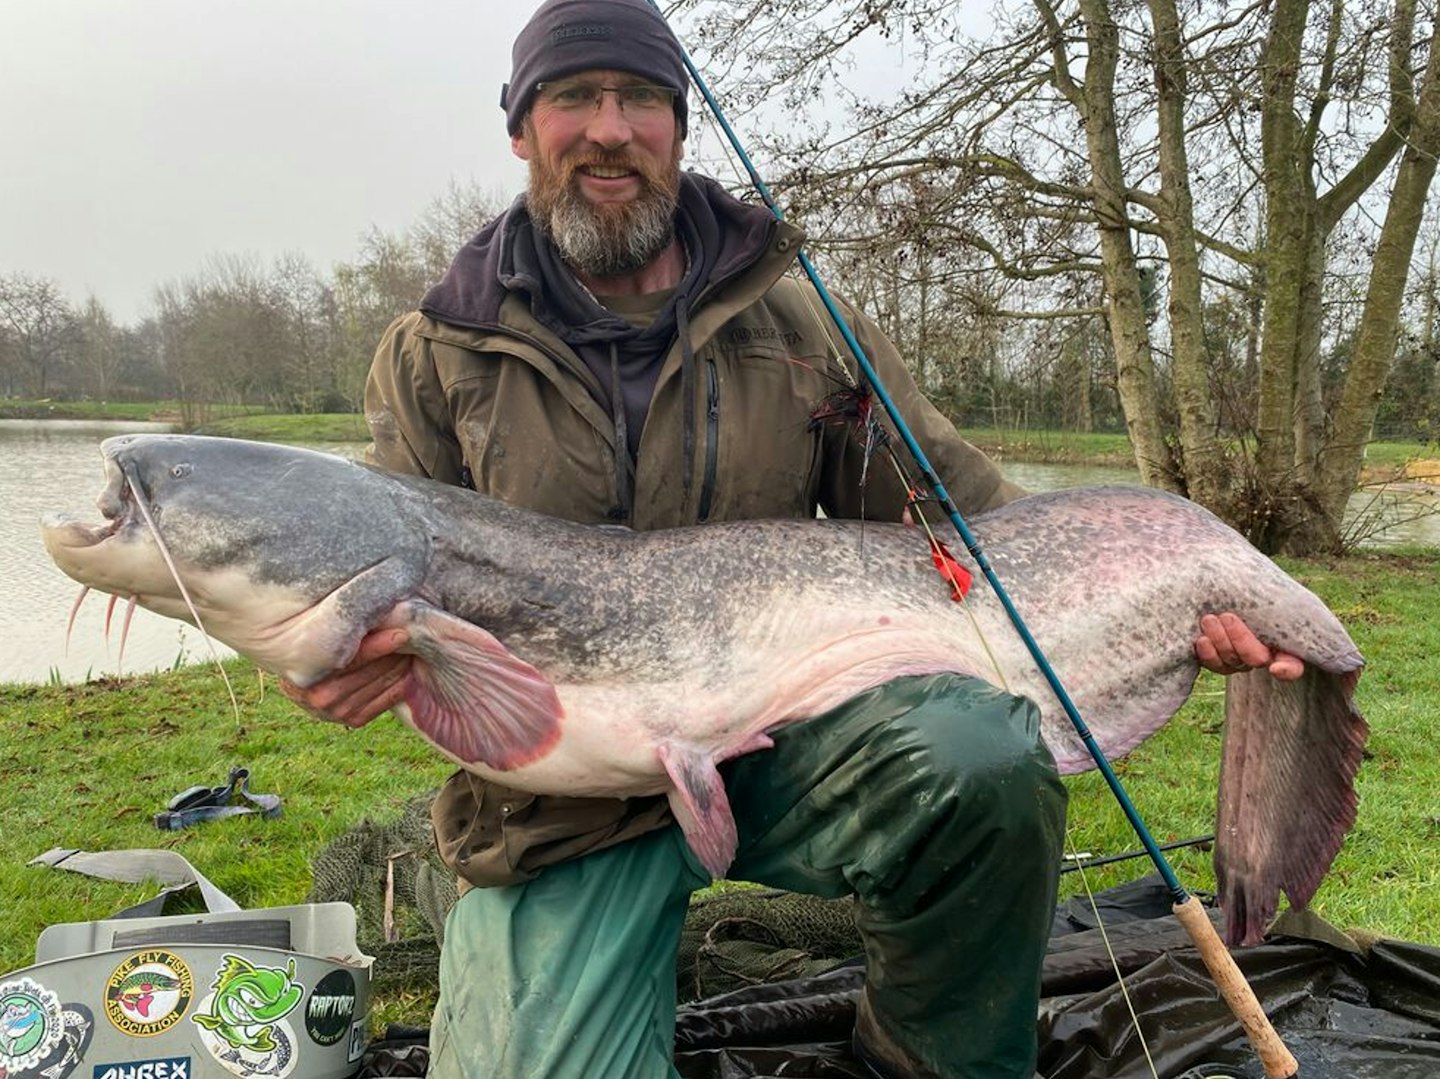 Oliver Cullingford landing the UK’s biggest-ever fly-caught catfish weighing 66lb 8oz